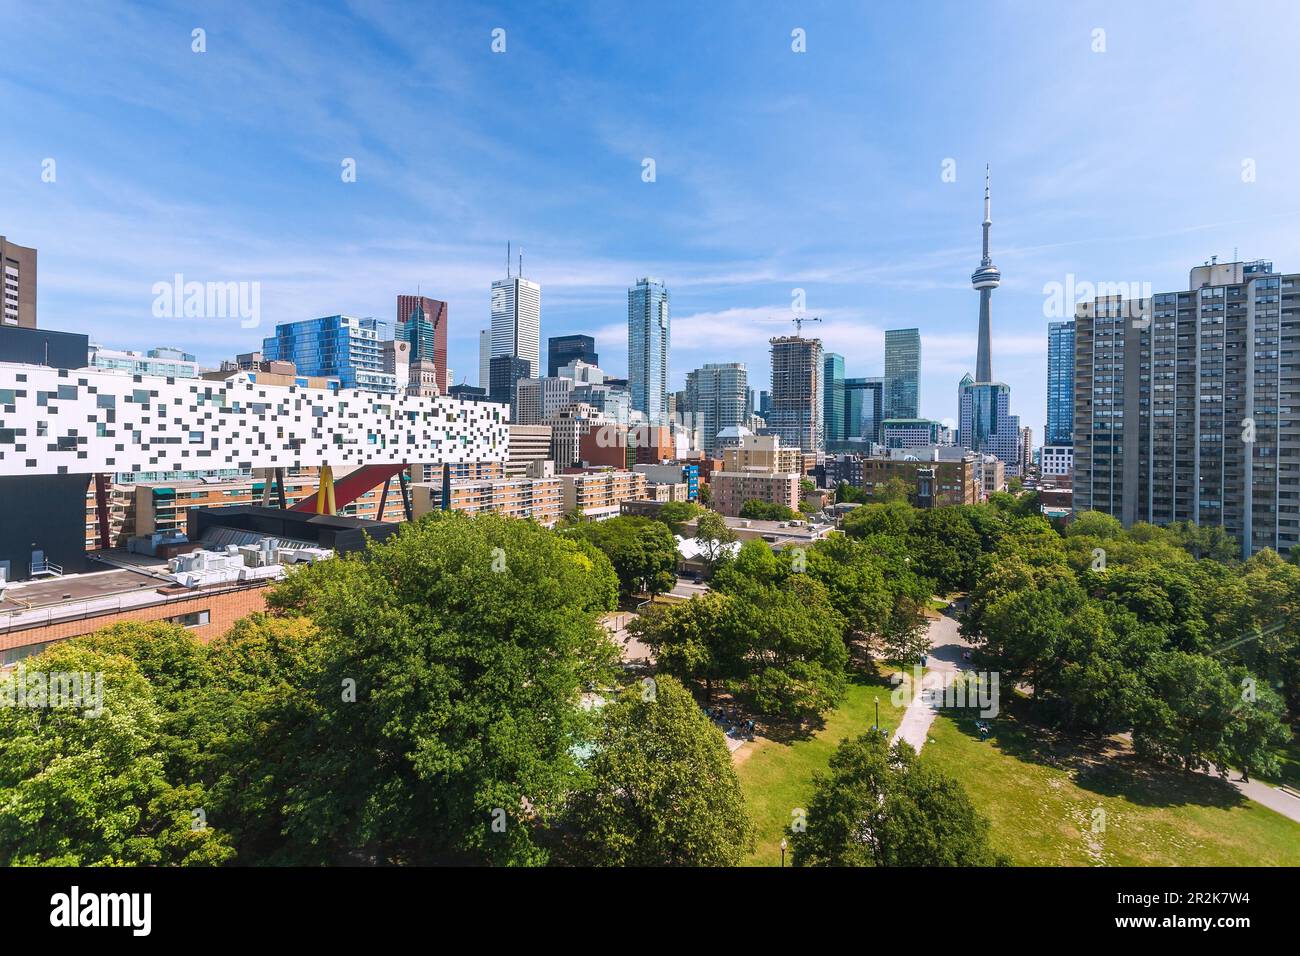 Toronto, Grange Park and Sharp Center for Design, CN Tower, view from Art Gallery of Ontario Stock Photo